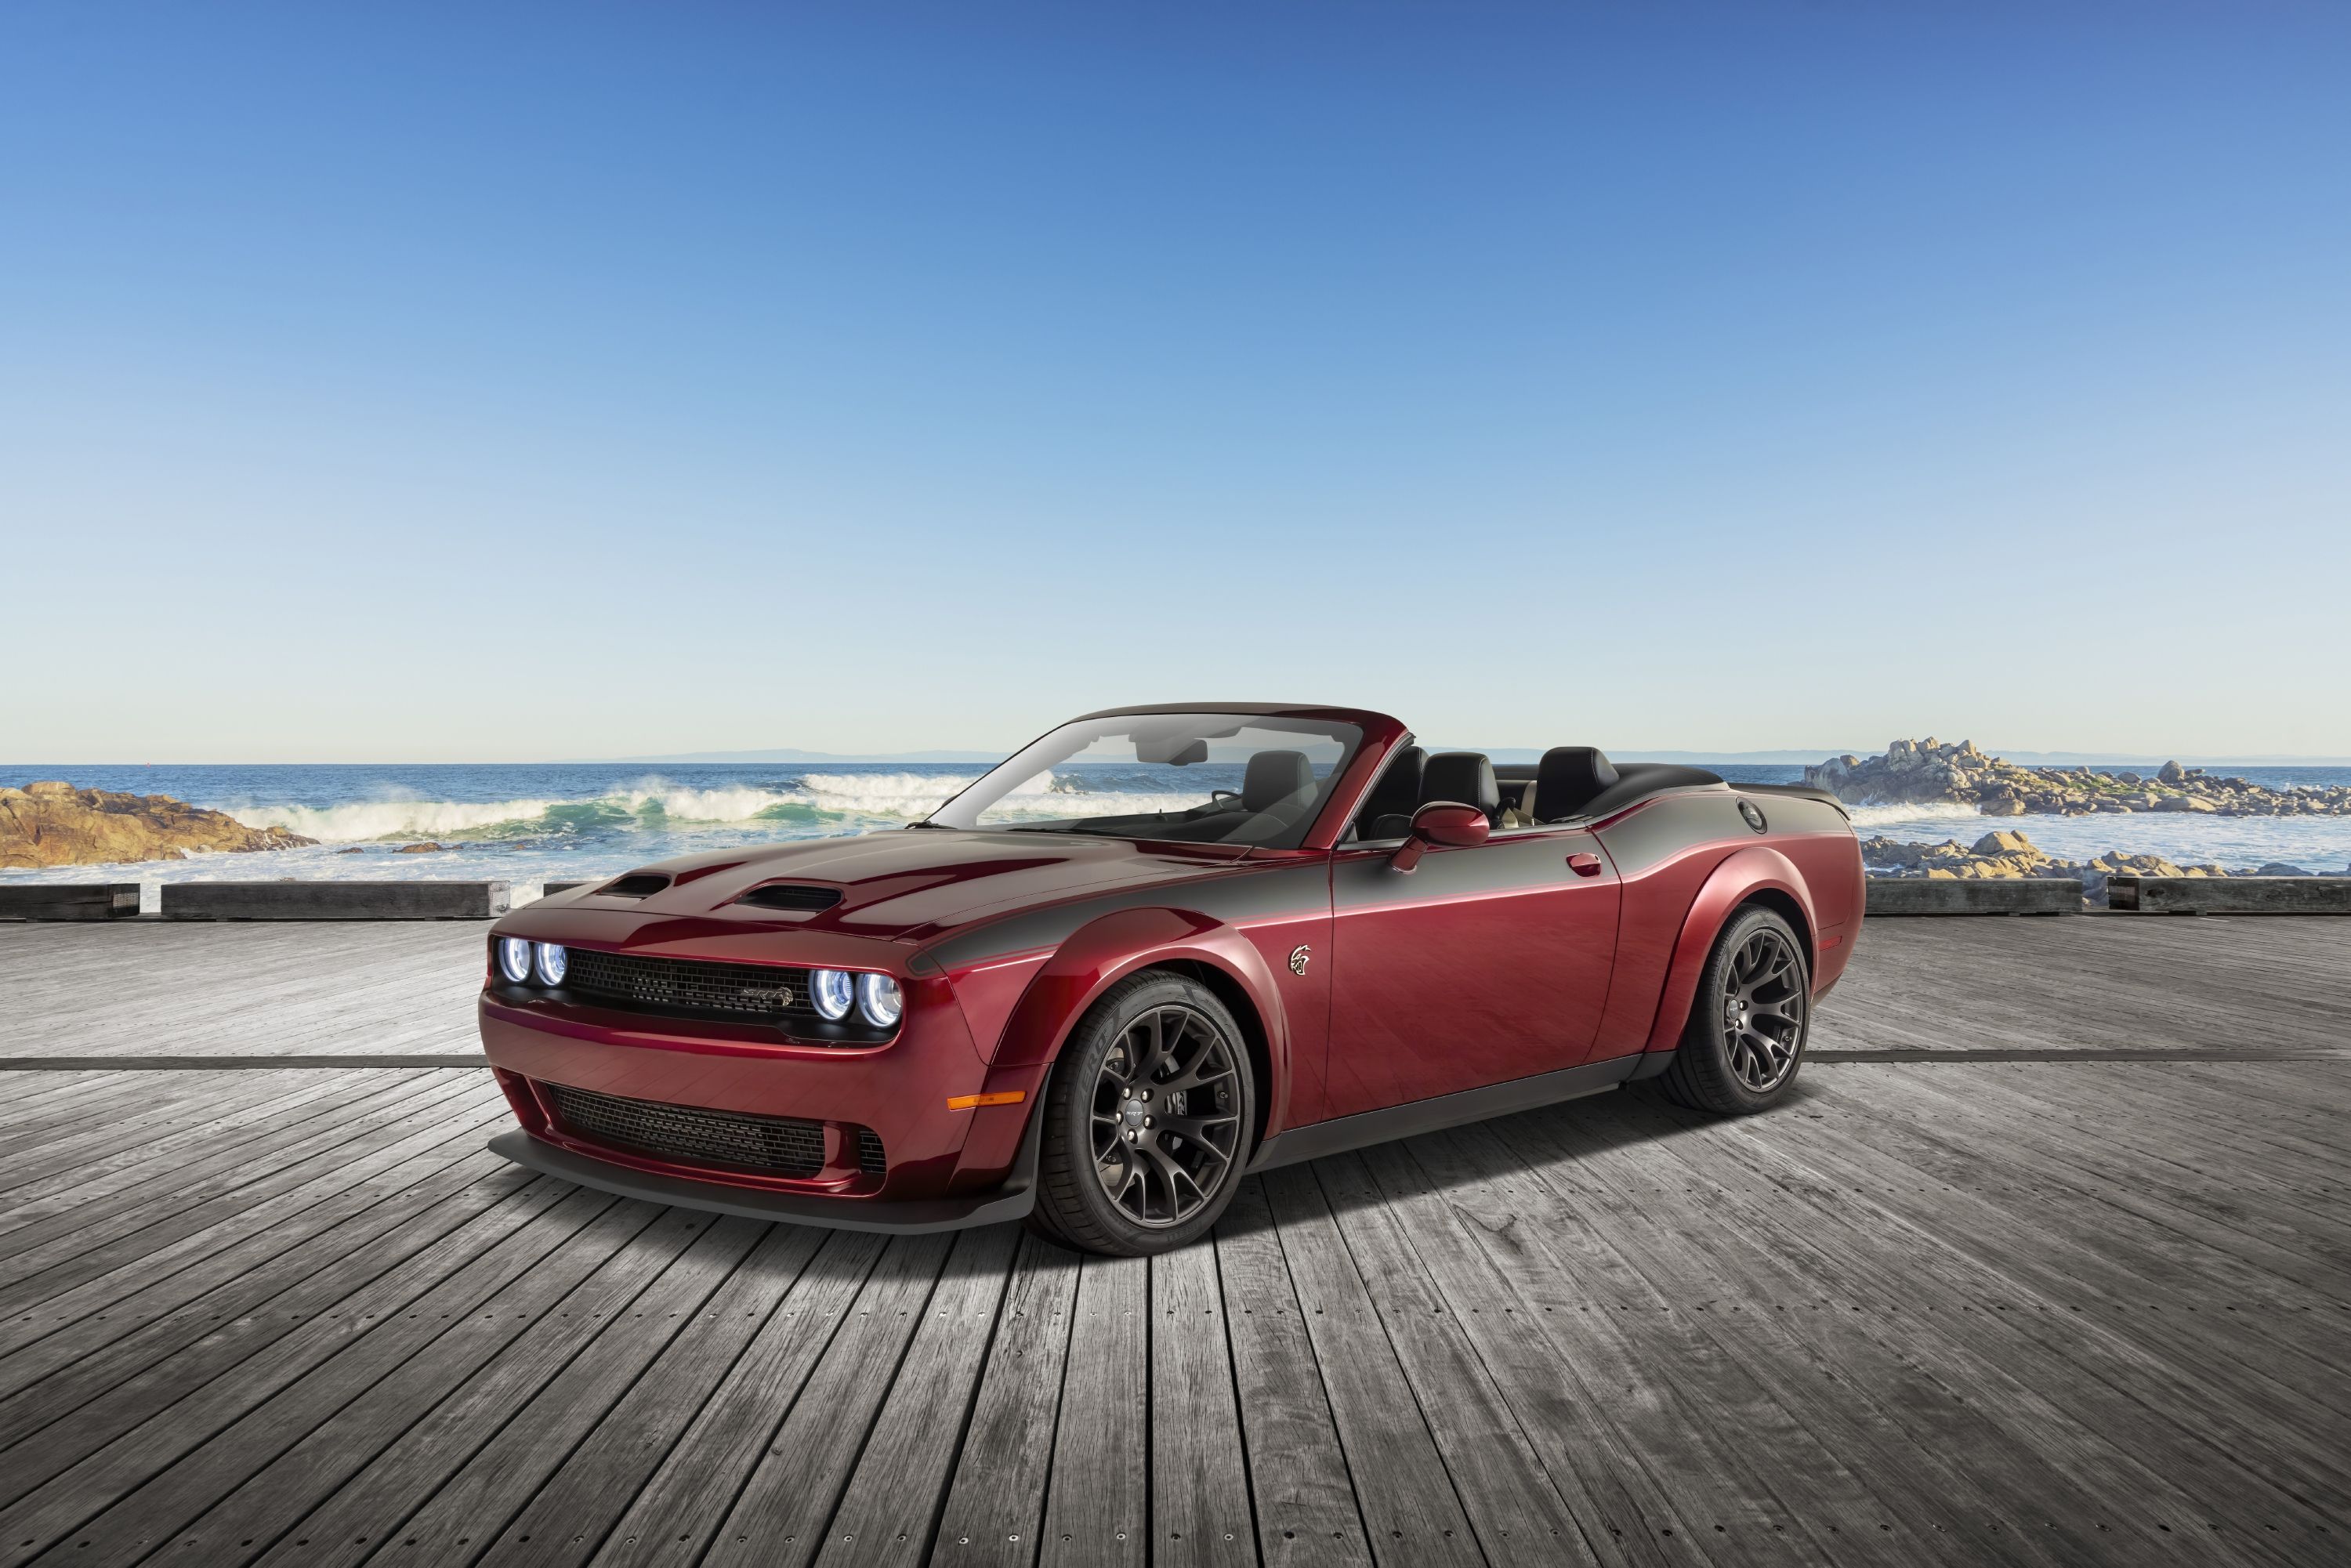 2023 Dodge Challenger, Charger Production To End 'No Later Than